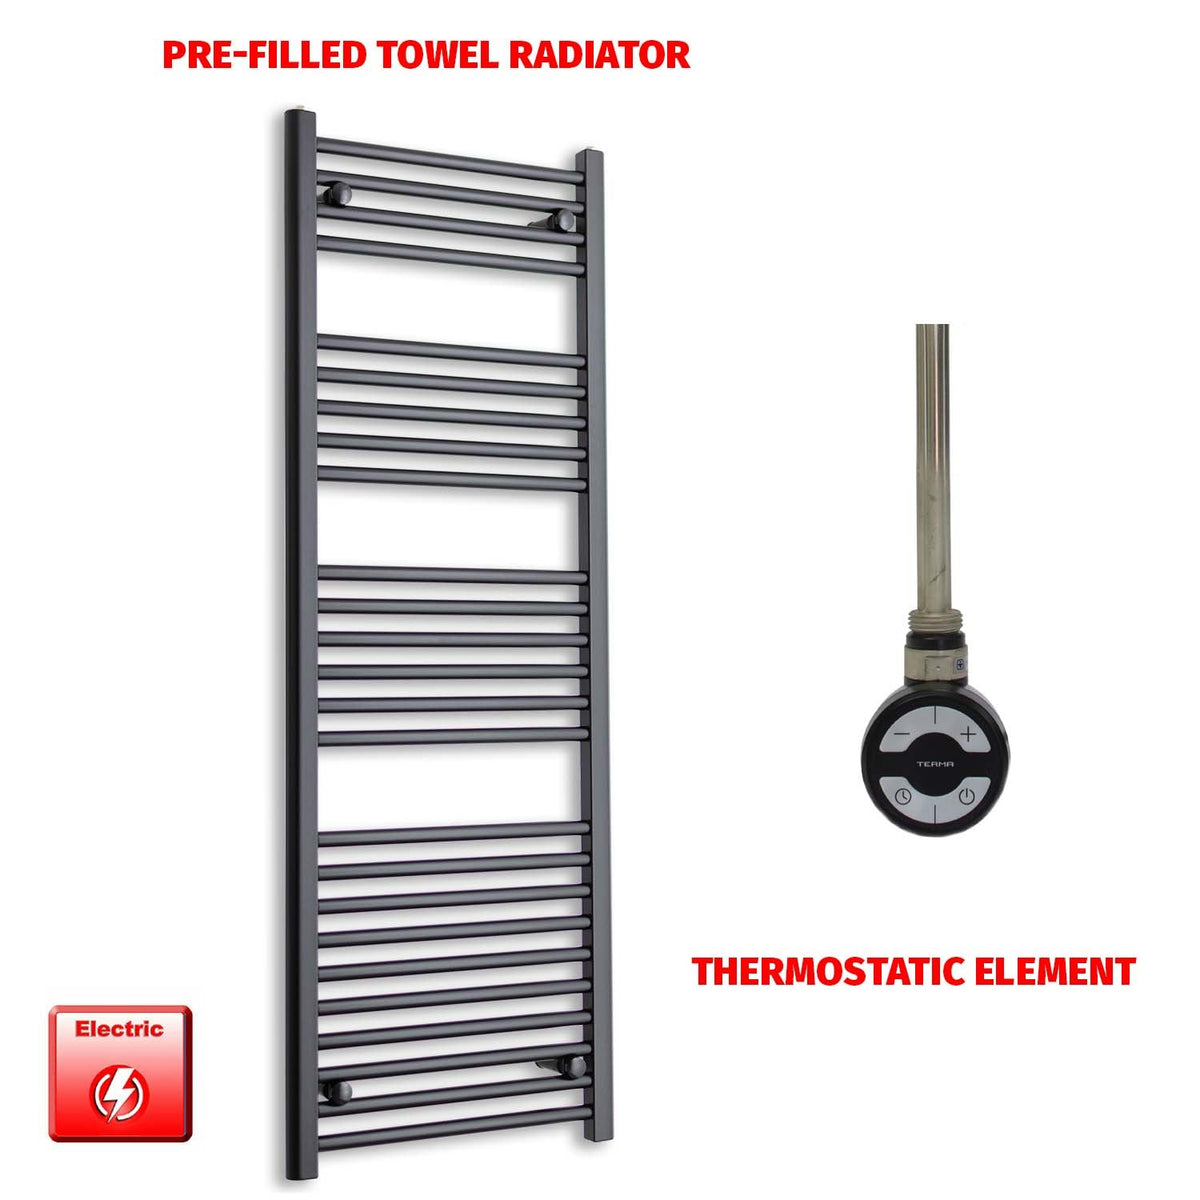 1400 x 550mm Wide Flat Black Pre-Filled Electric Heated Towel Radiator HTR MOA Thermostatic No Timer